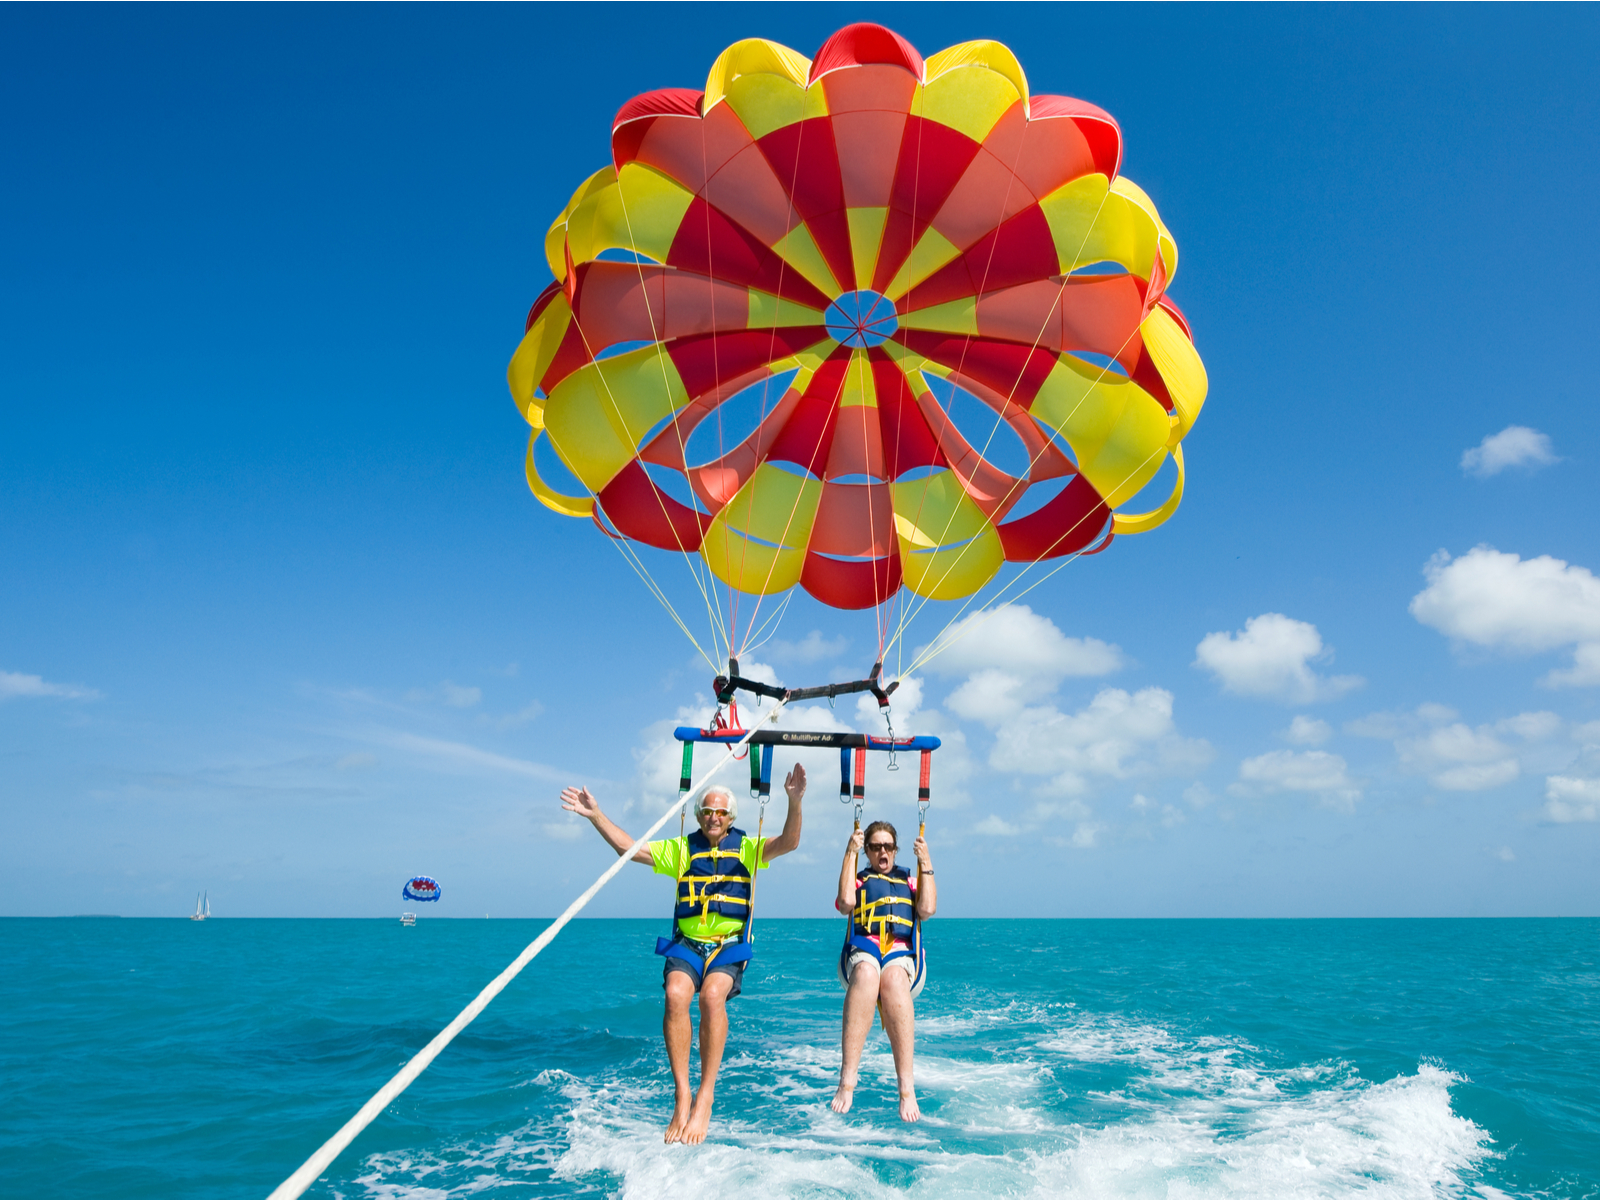 Couple parasailing in Florida during the best time to go, in the early summer